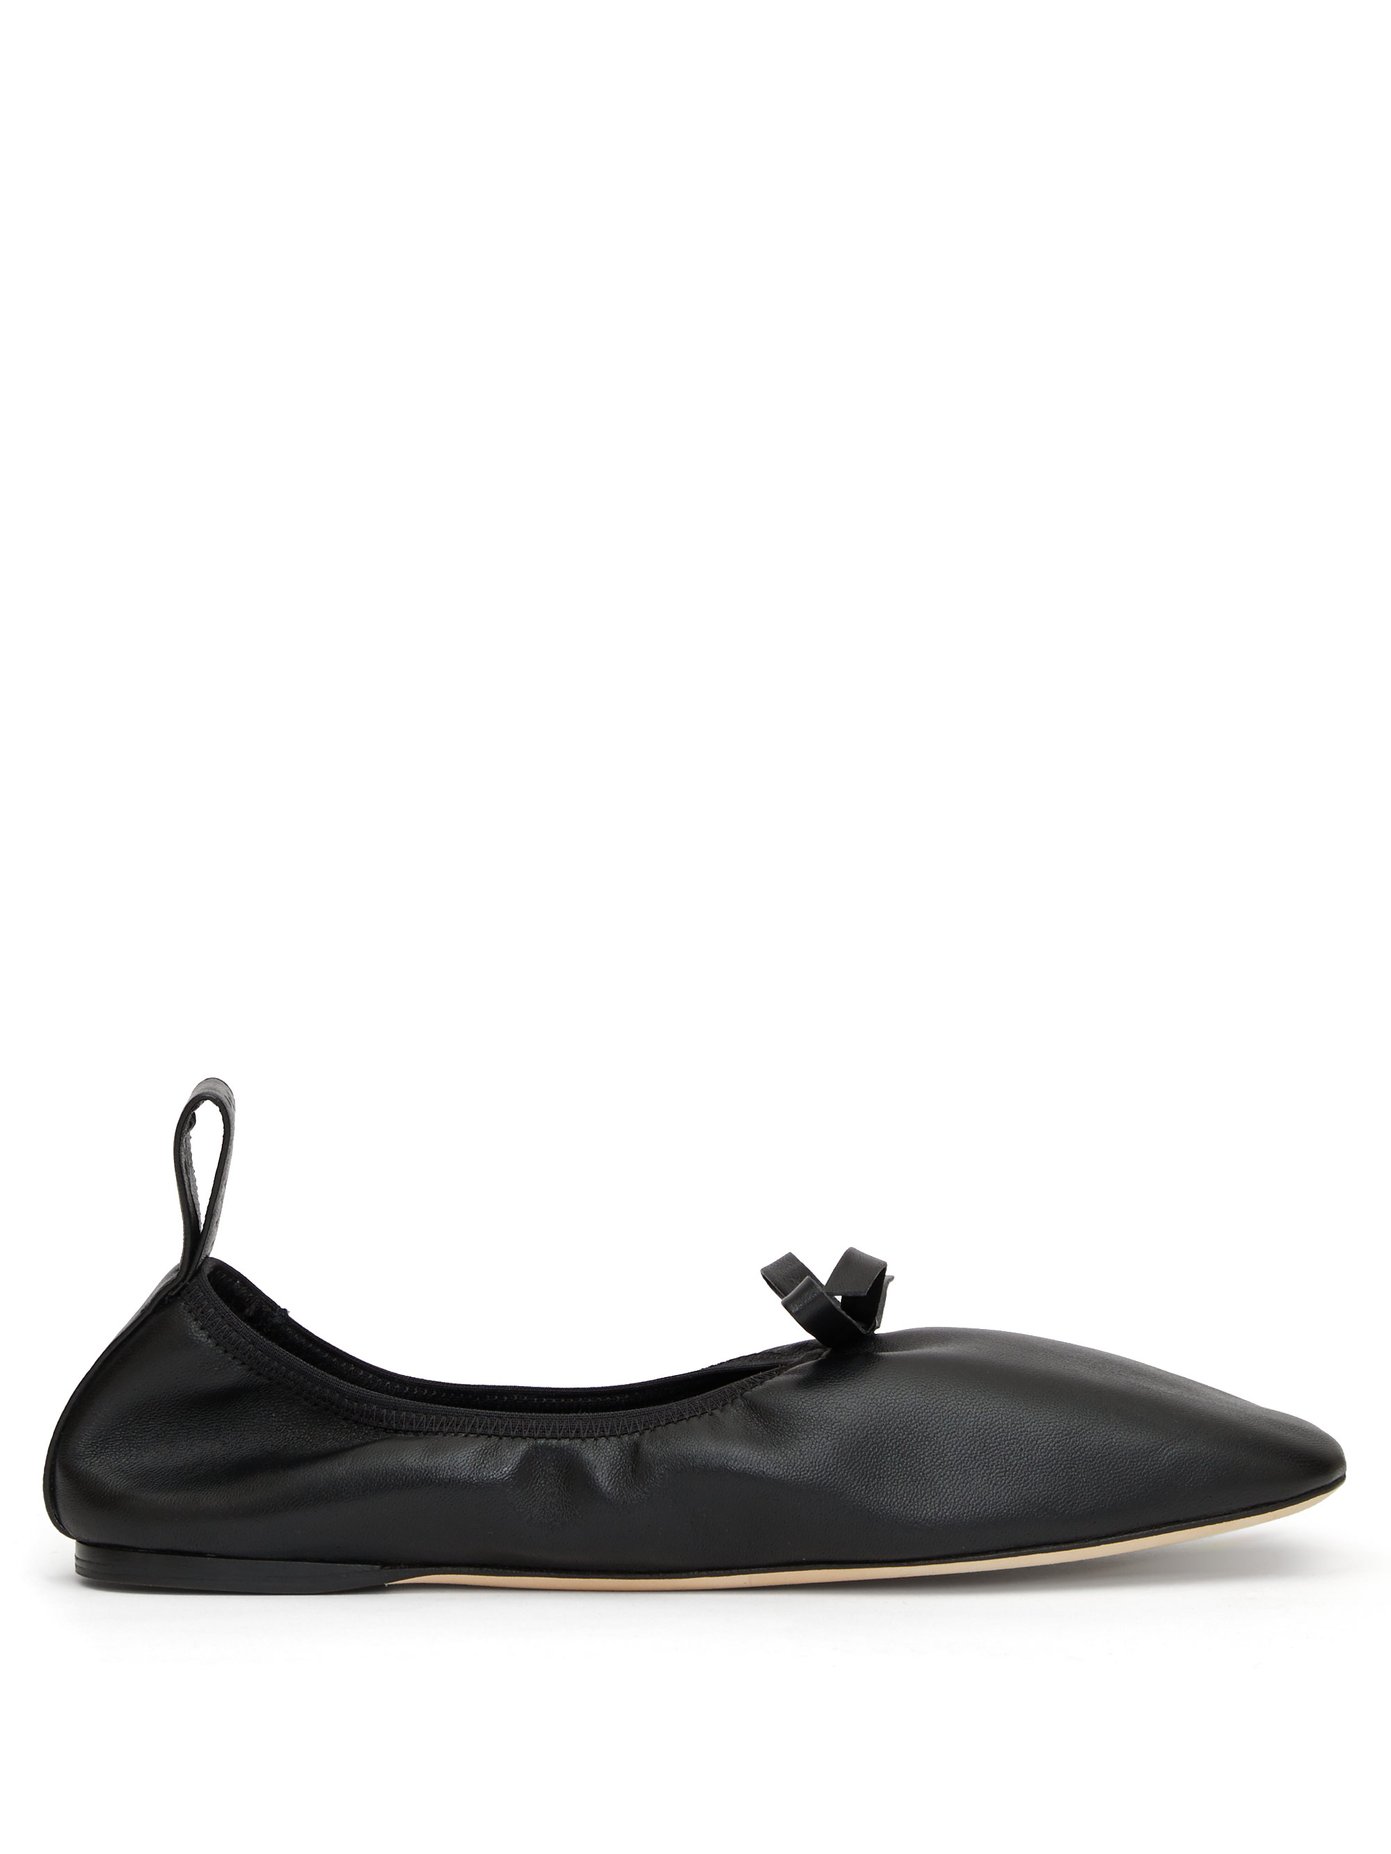 Square-toe elasticated leather ballet 